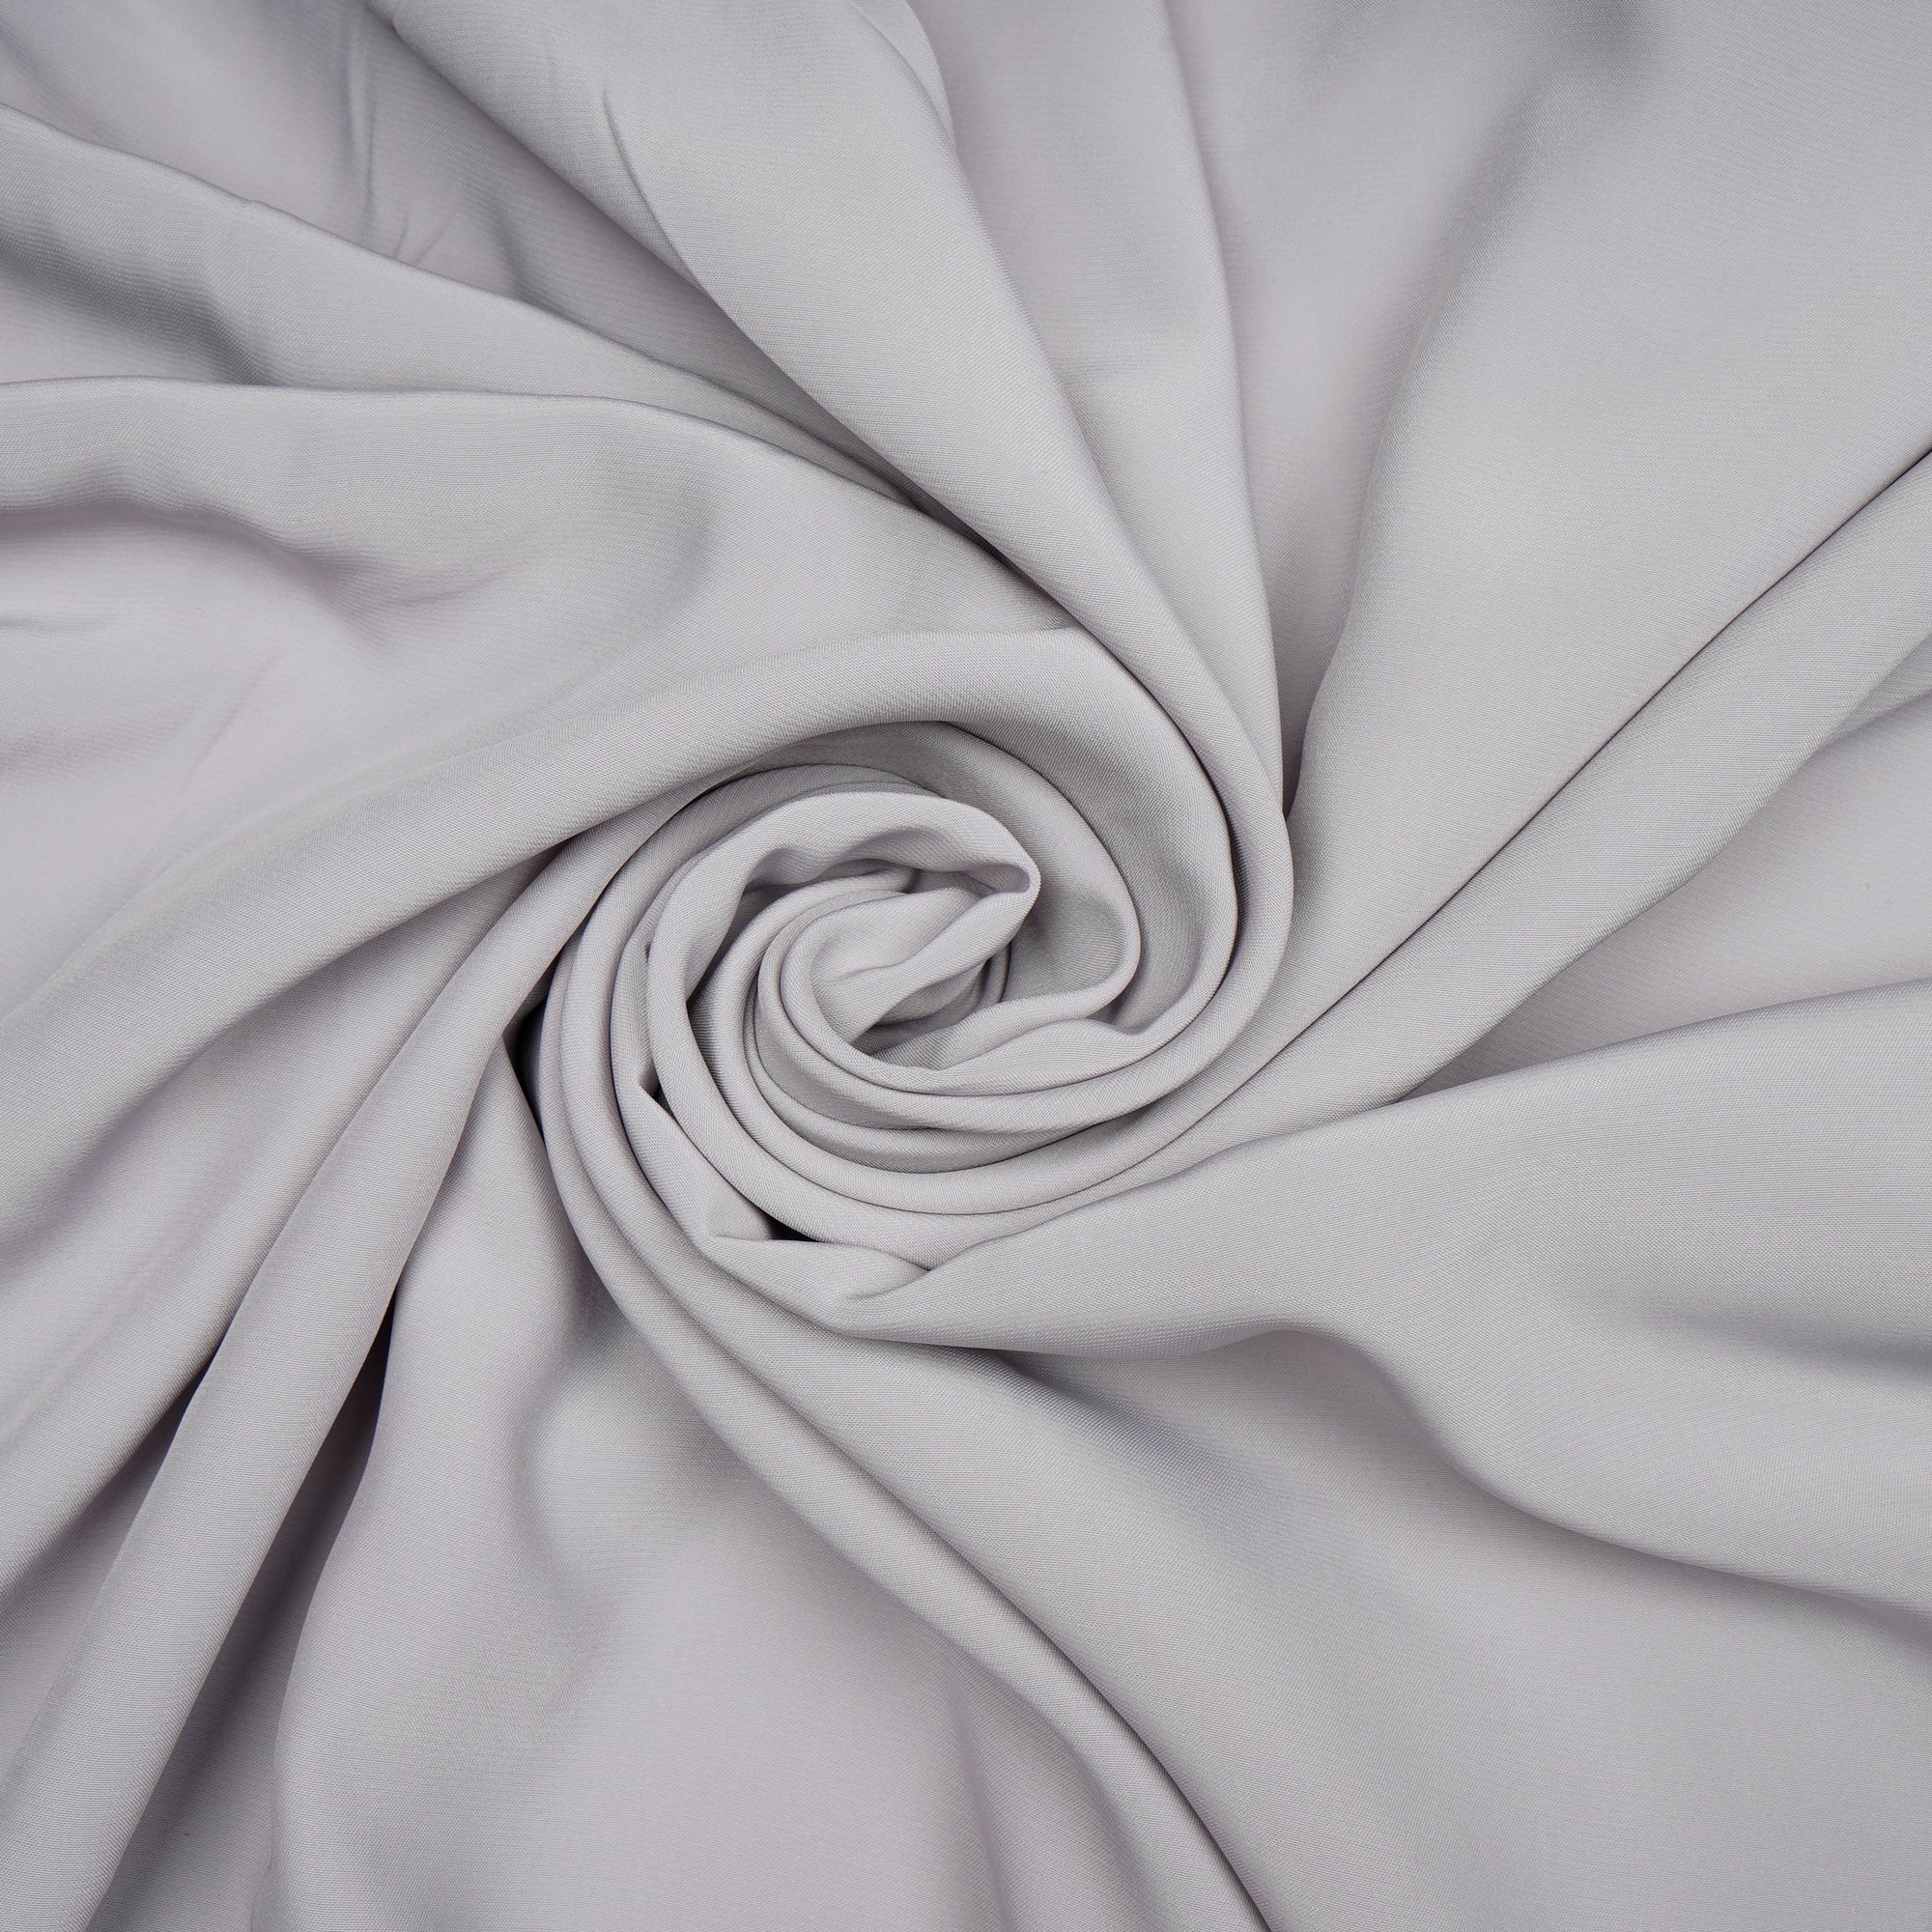 Light Gray Solid Dyed Imported Velvet Satin Fabric (60" Width)